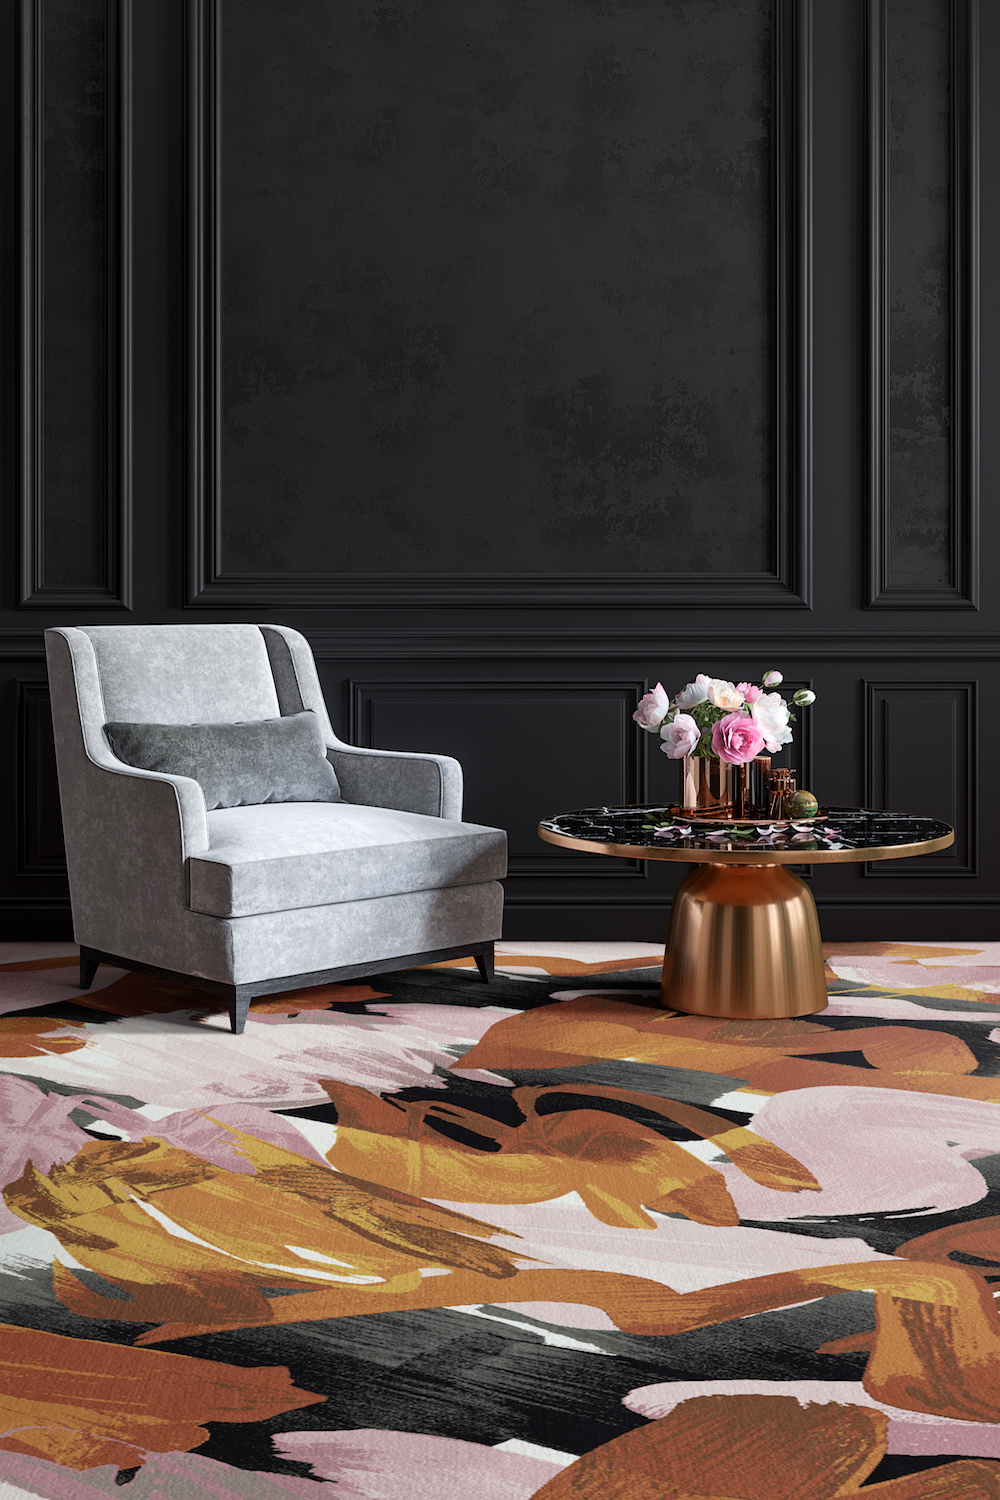 Classic black, dark interior with armchair, coffee table, flowers and wall moldings. 3d render illustration mockup.